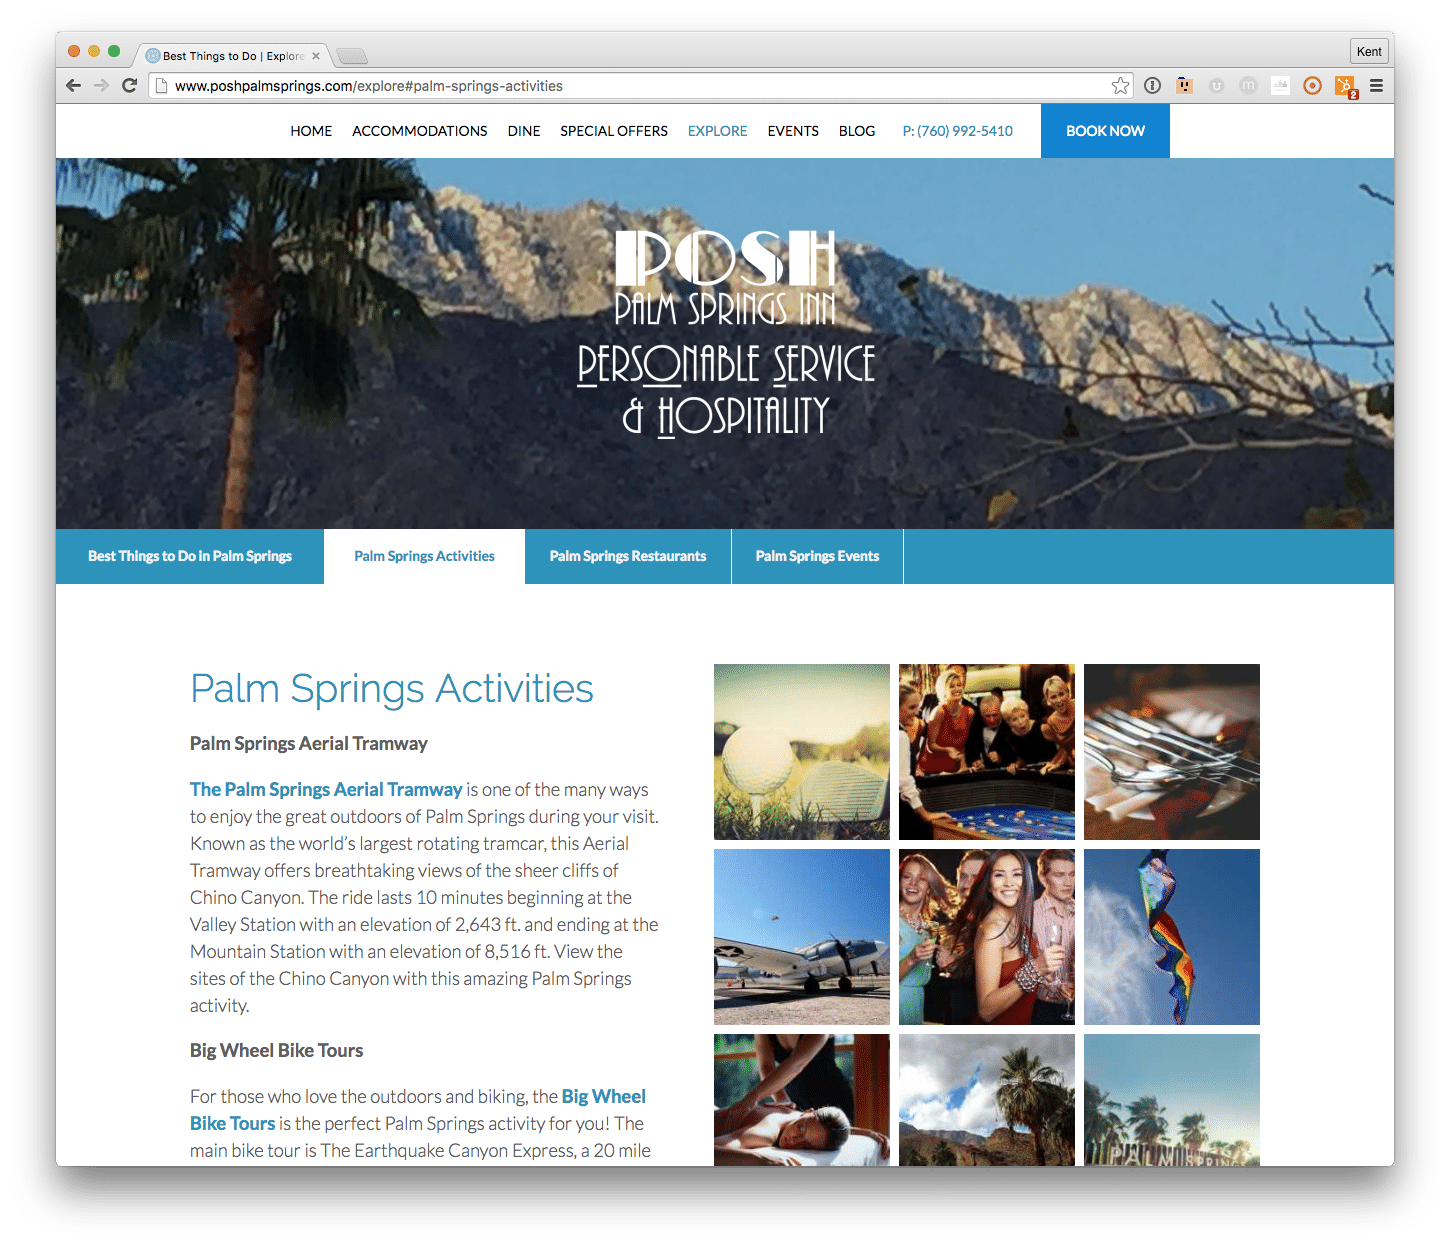 Posh Palm Springs - good example of what bed & breakfast website's "local insights" page should look like